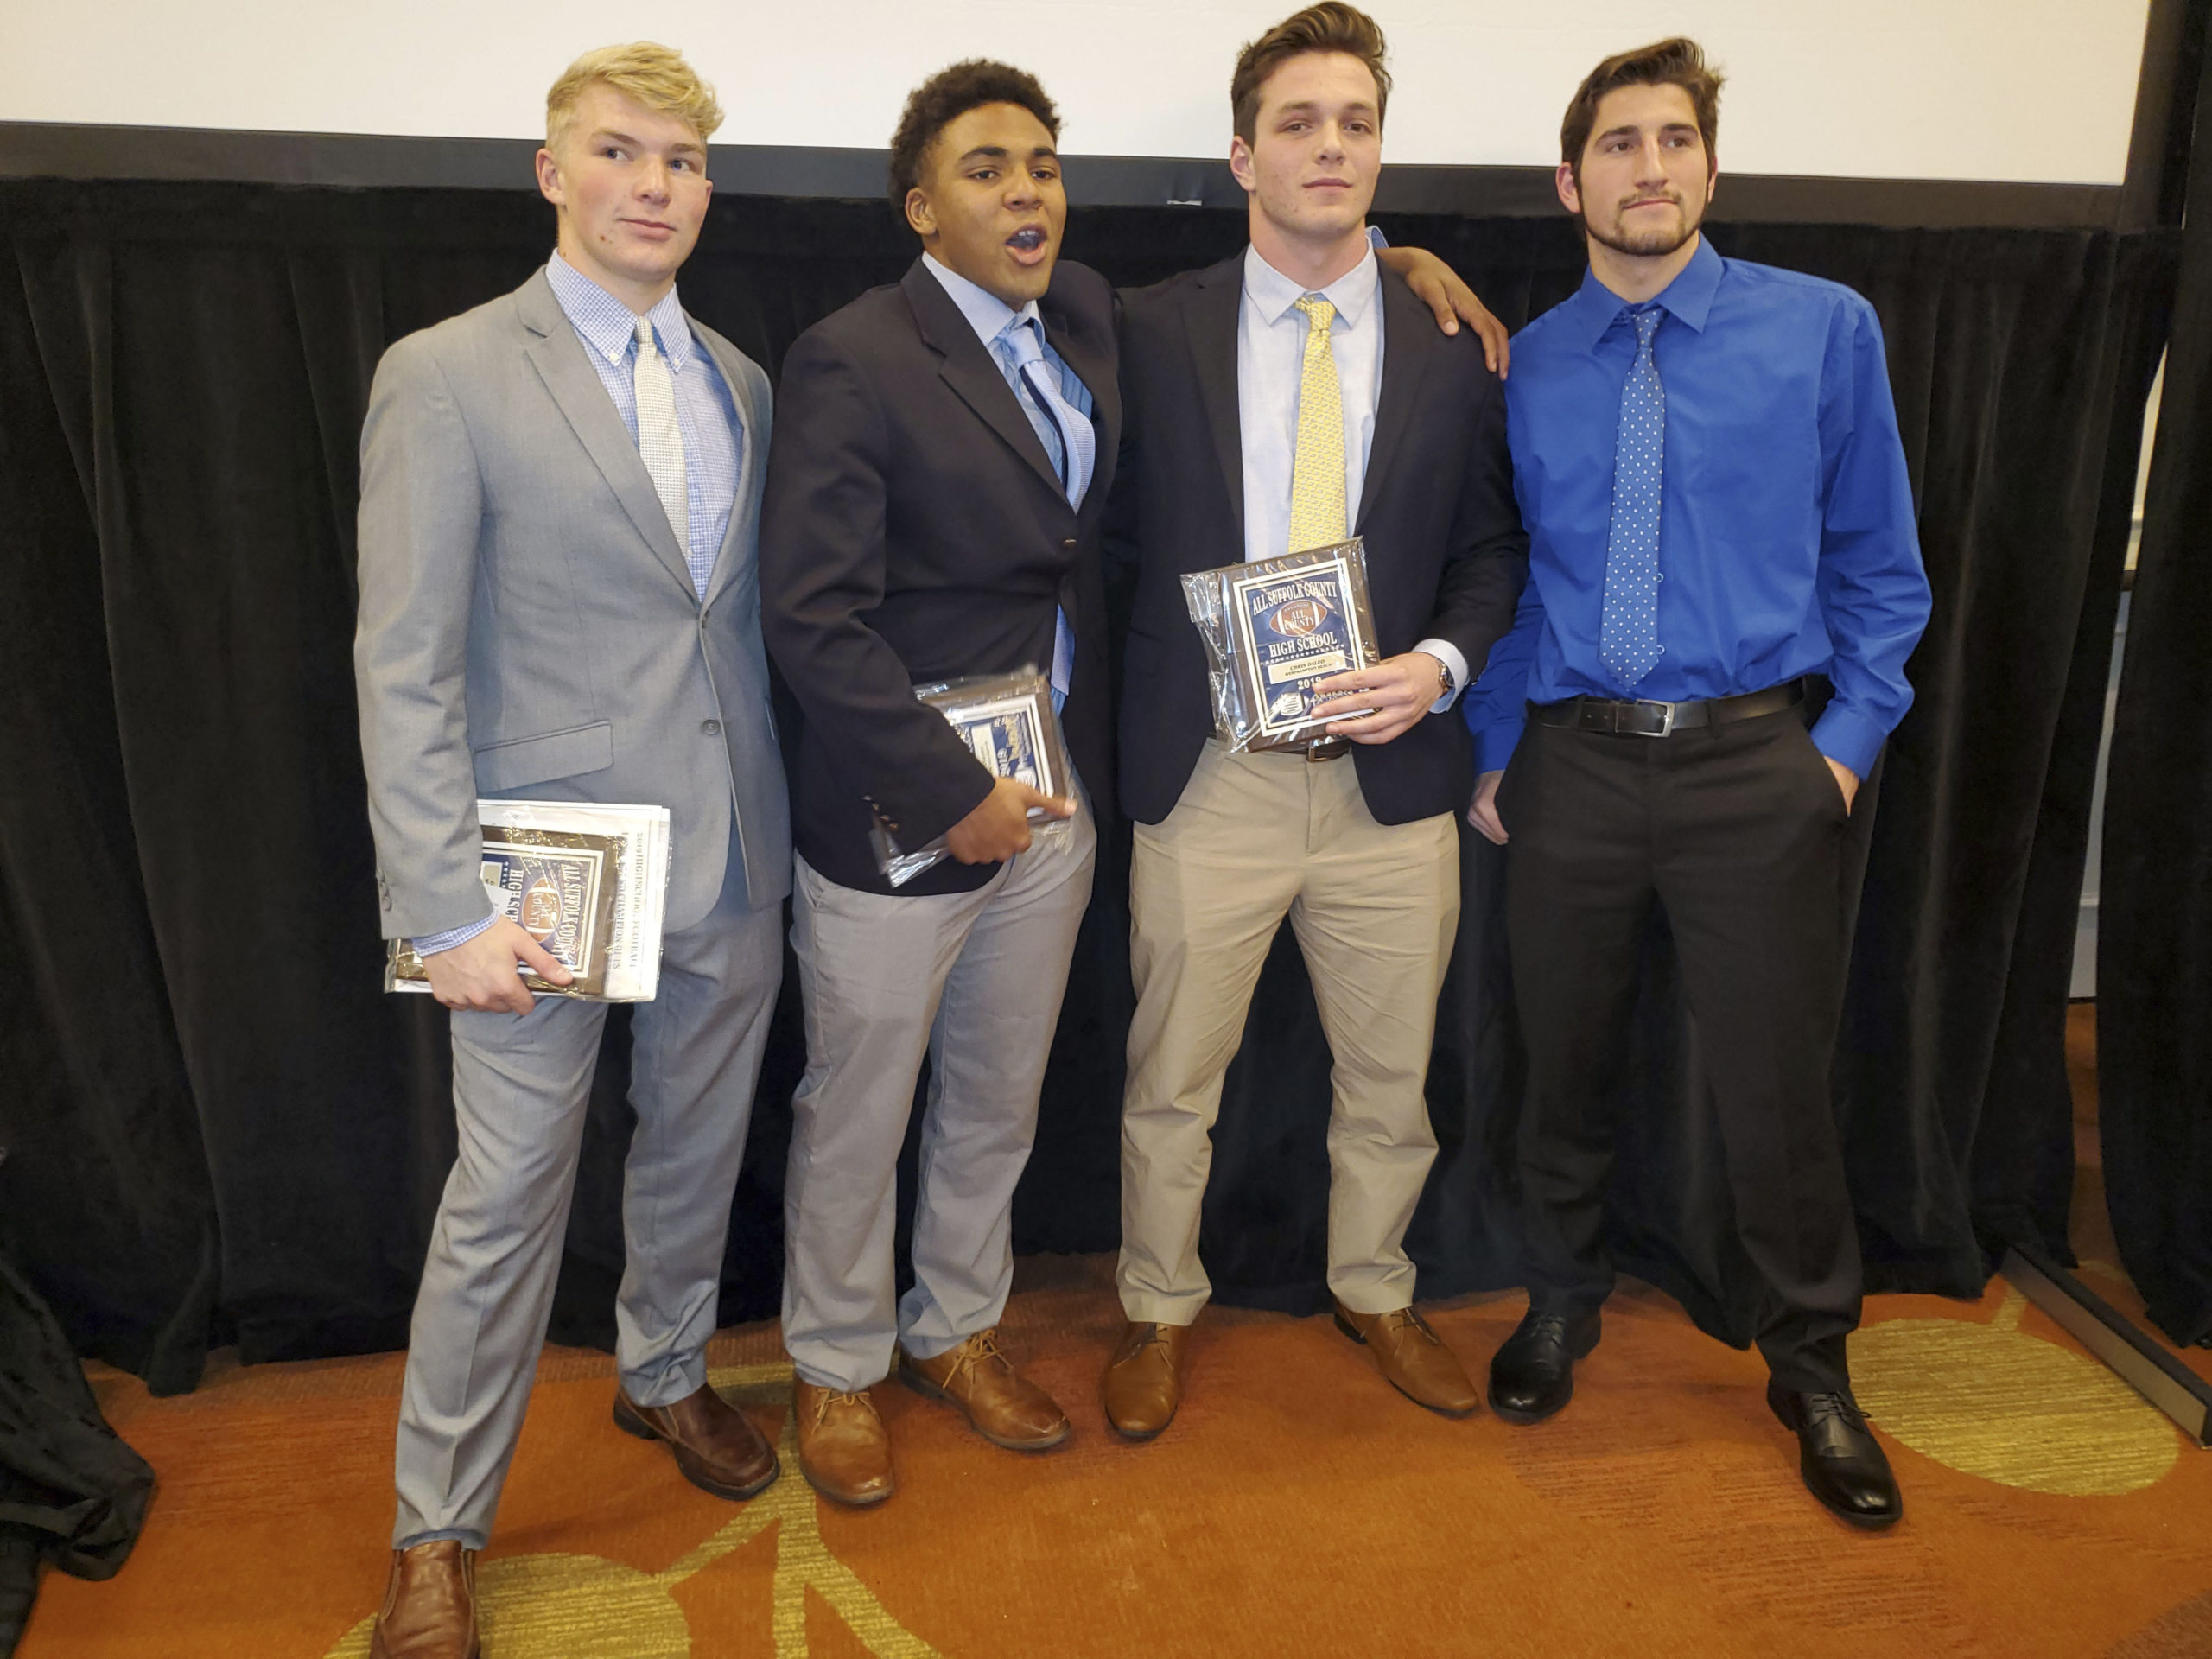 It was a big night for the Hurricanes at the Suffolk County Awards Dinner at the Hyatt Regency in Hauppauge on Monday night. From left to right, head coach Bryan Schaumloffel, Shavar Coffey, Jaden AlfanoStJohn, Jesse AlfanoStJohn, Chris Daleo, Devin Koonmen and assistant coach Cole Magner.